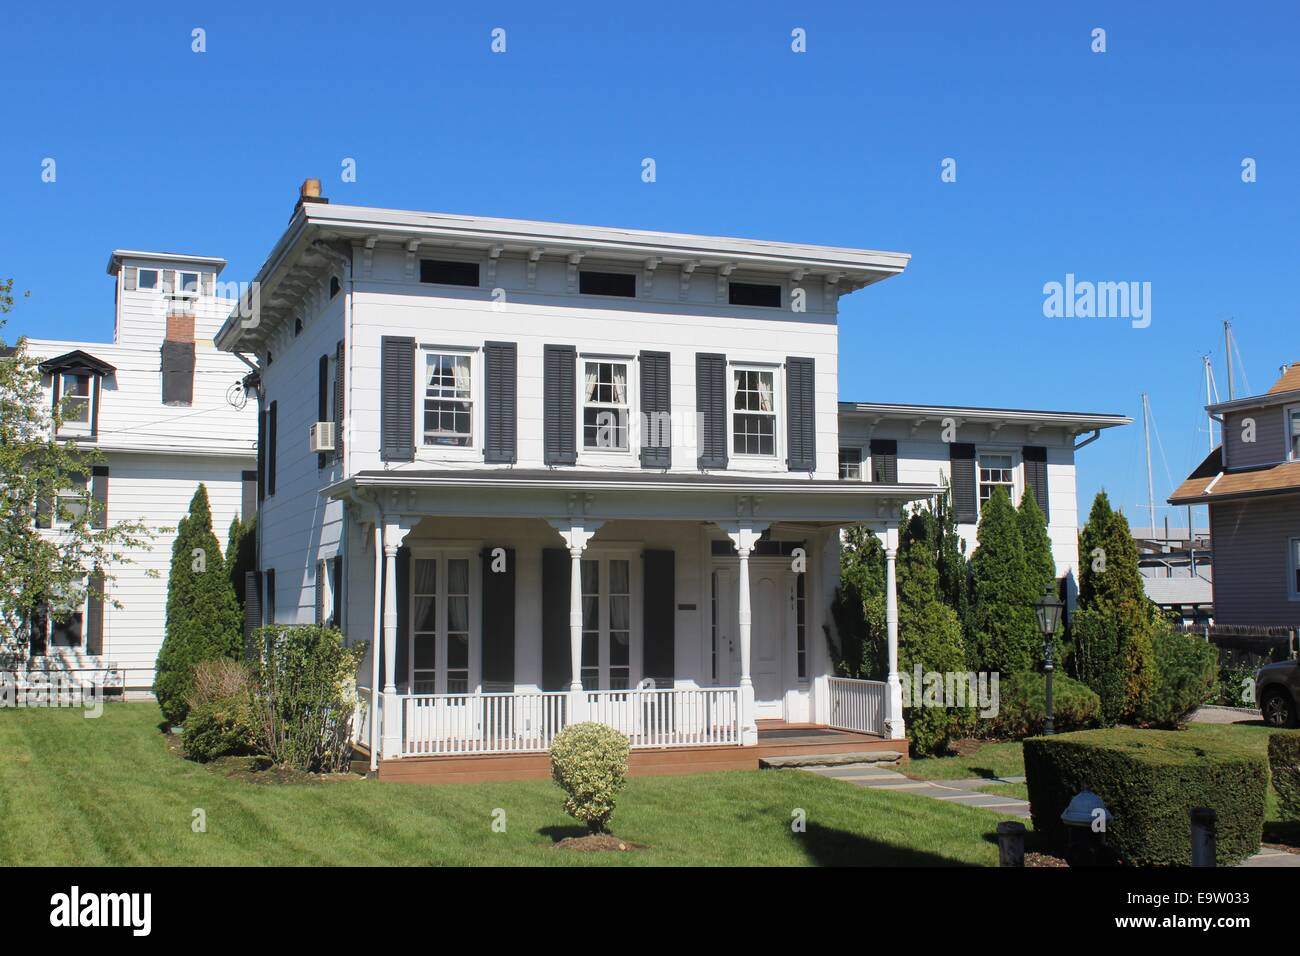 Wallpaper  canandaigua new York historic mansion italianate  Victorian architecture ontariocounty ny newyork onasill Arsenal  hill 152 n main st alts brown house hip roof gable finger lake  district 2889x2167   1011473  HD 